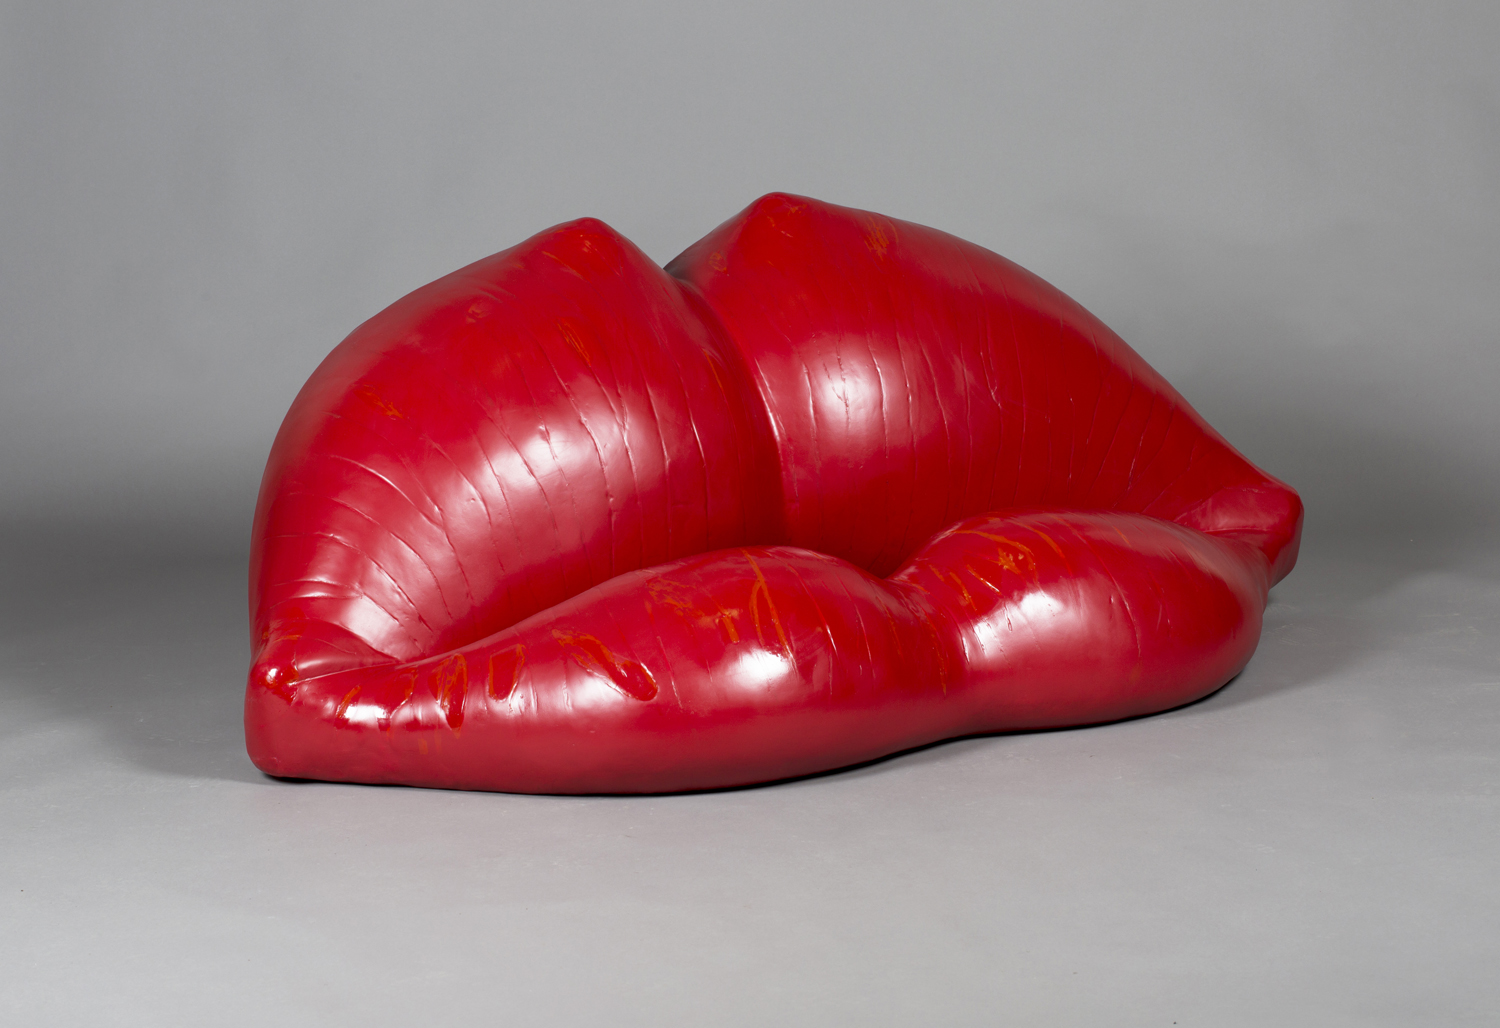 A Louis Durot red polyurethane and foam 'L'échauffeuse' sofa sculpture, moulded in the form of a